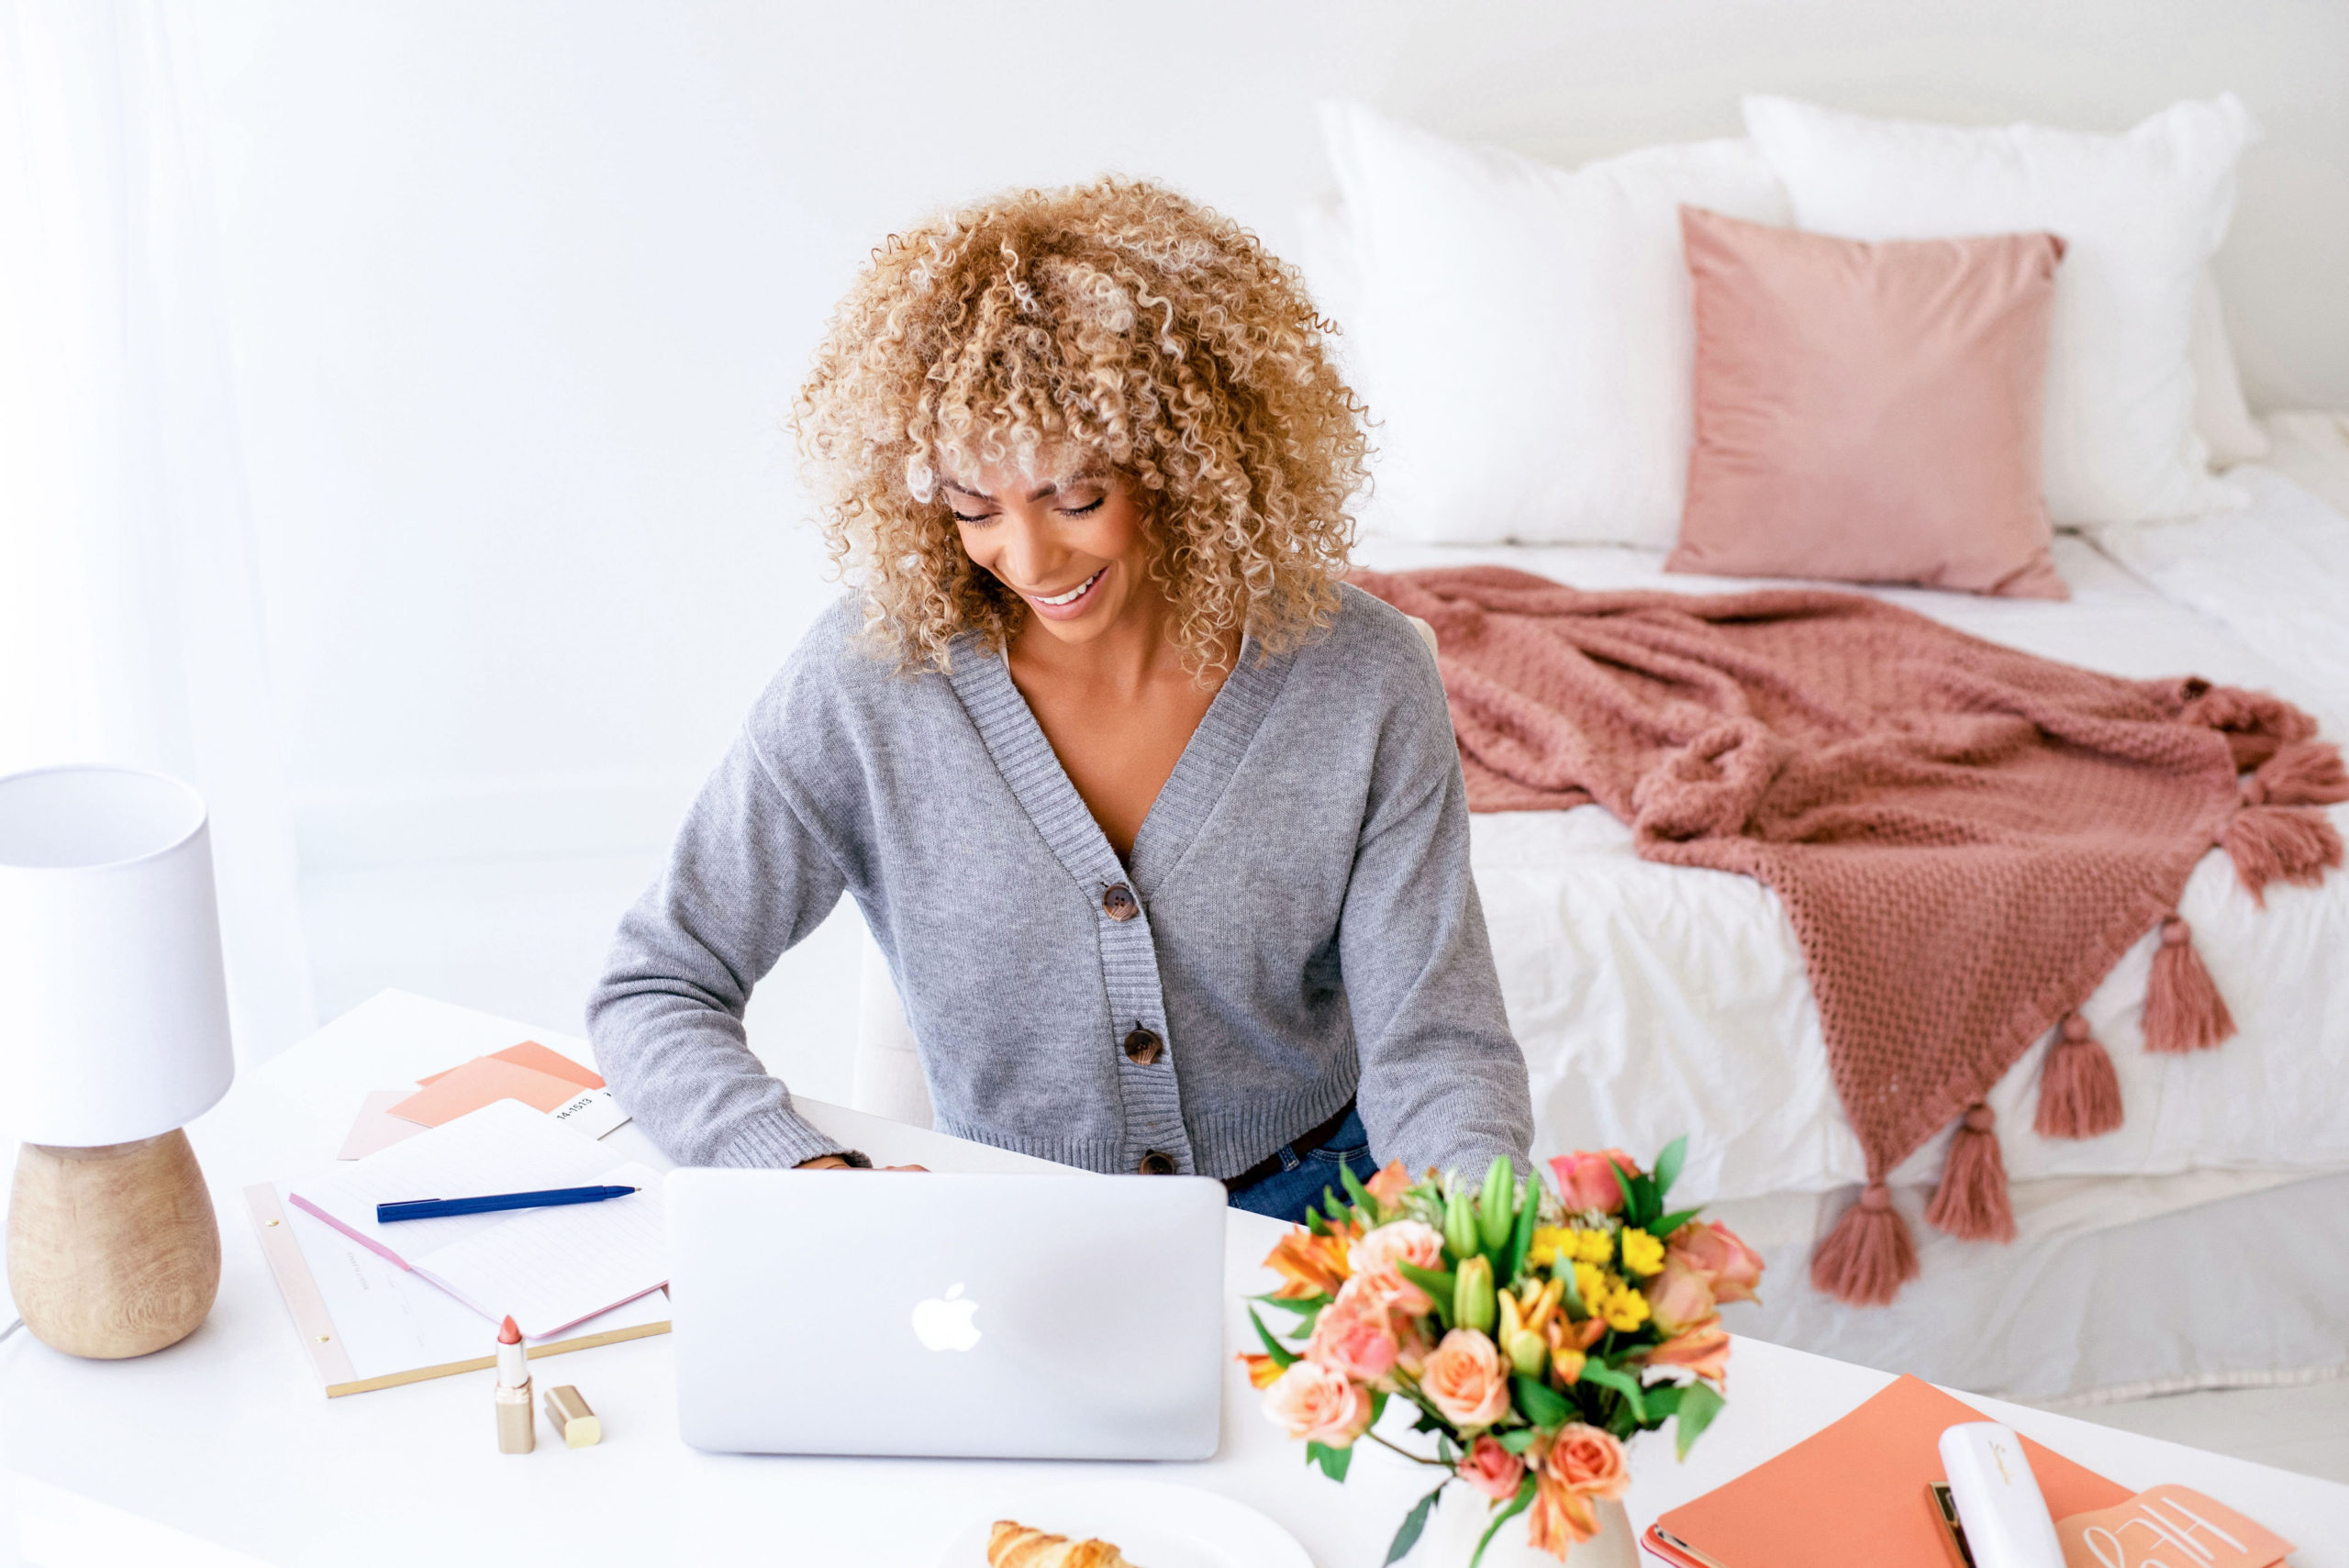 black-woman-with-blonde-curly-hair-wearing-a-blue-top-and-looking-at-a-laptop-on-a-white-table